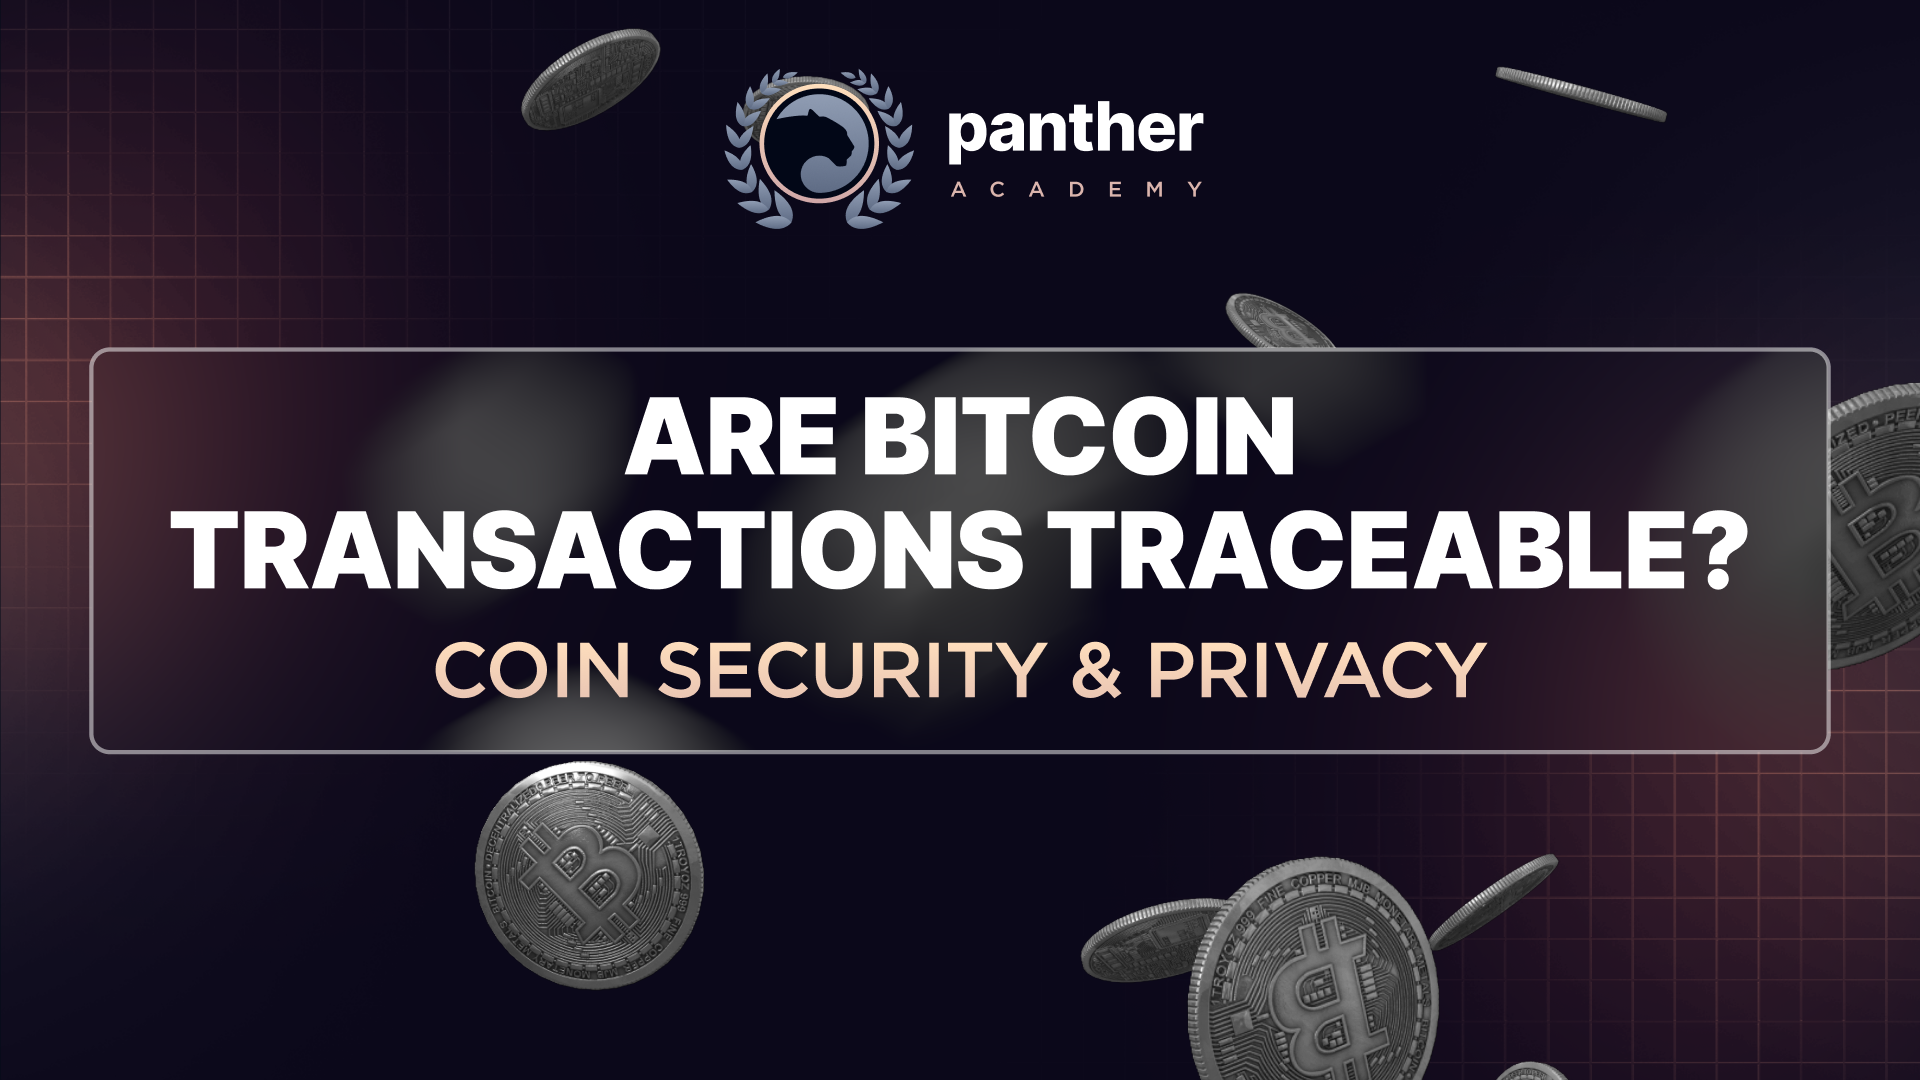 Are Bitcoin transactions traceable? Coin security & privacy